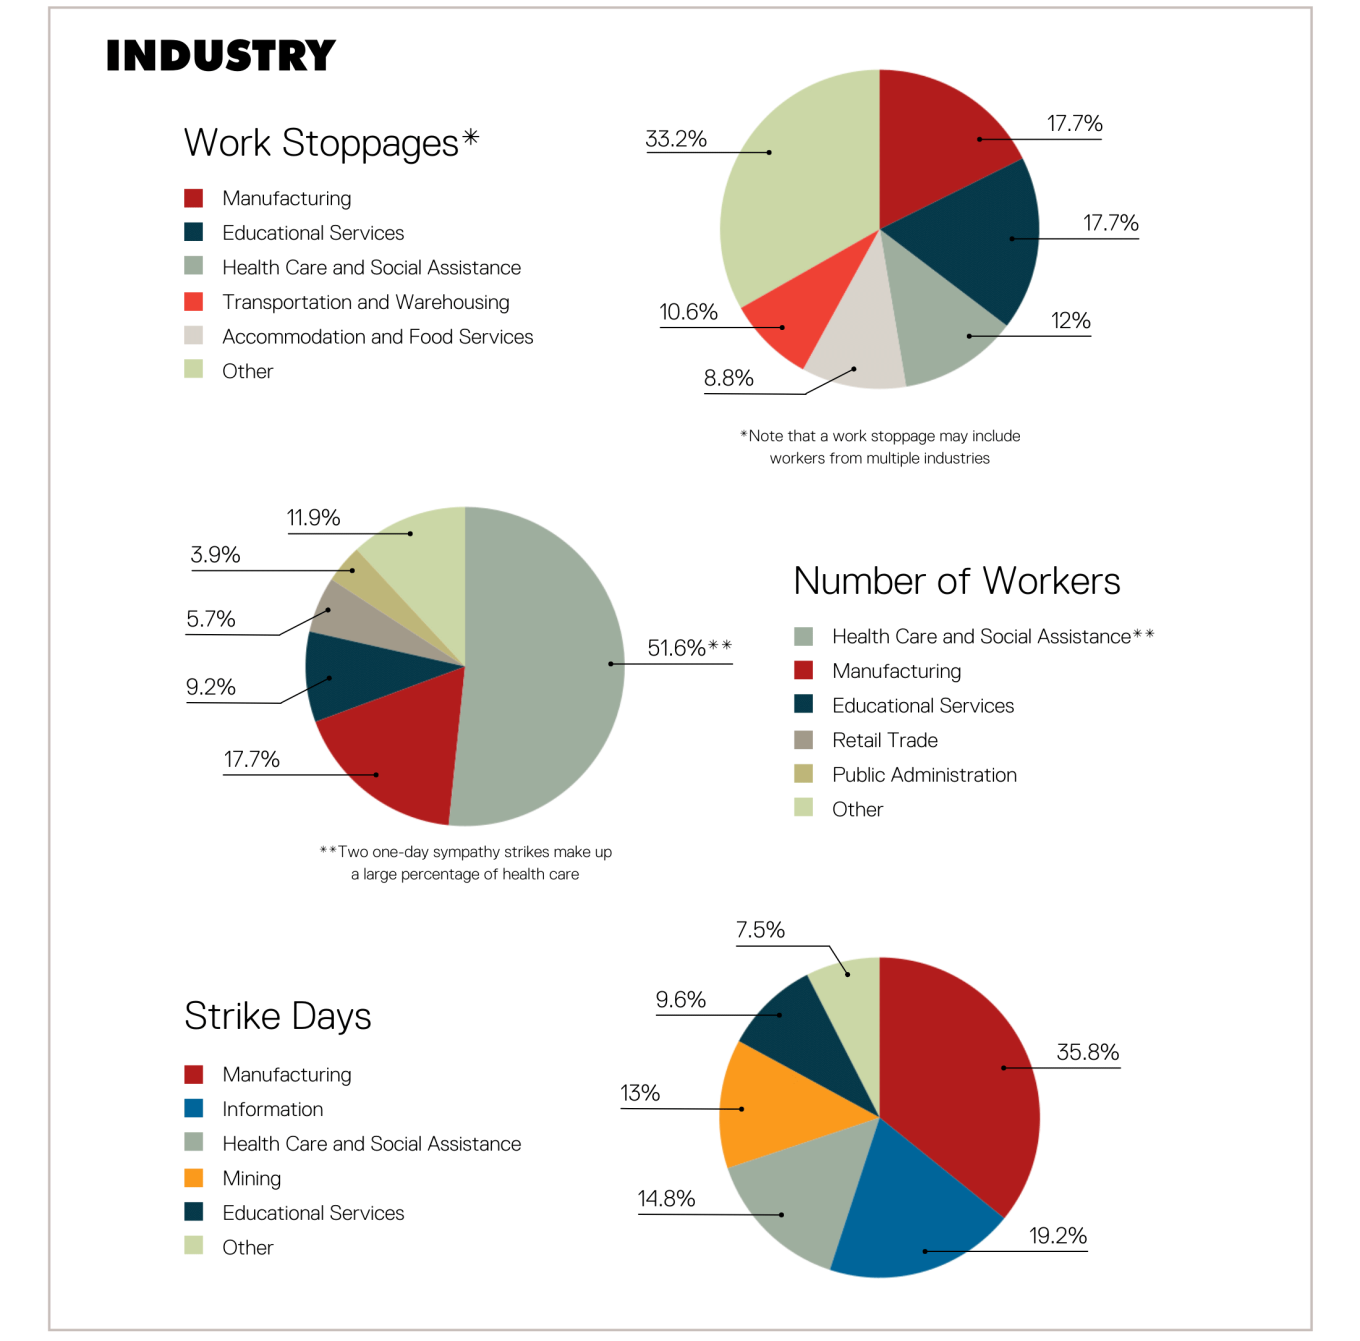 Industry. See table 2 in the data section at the end of this report for full data.